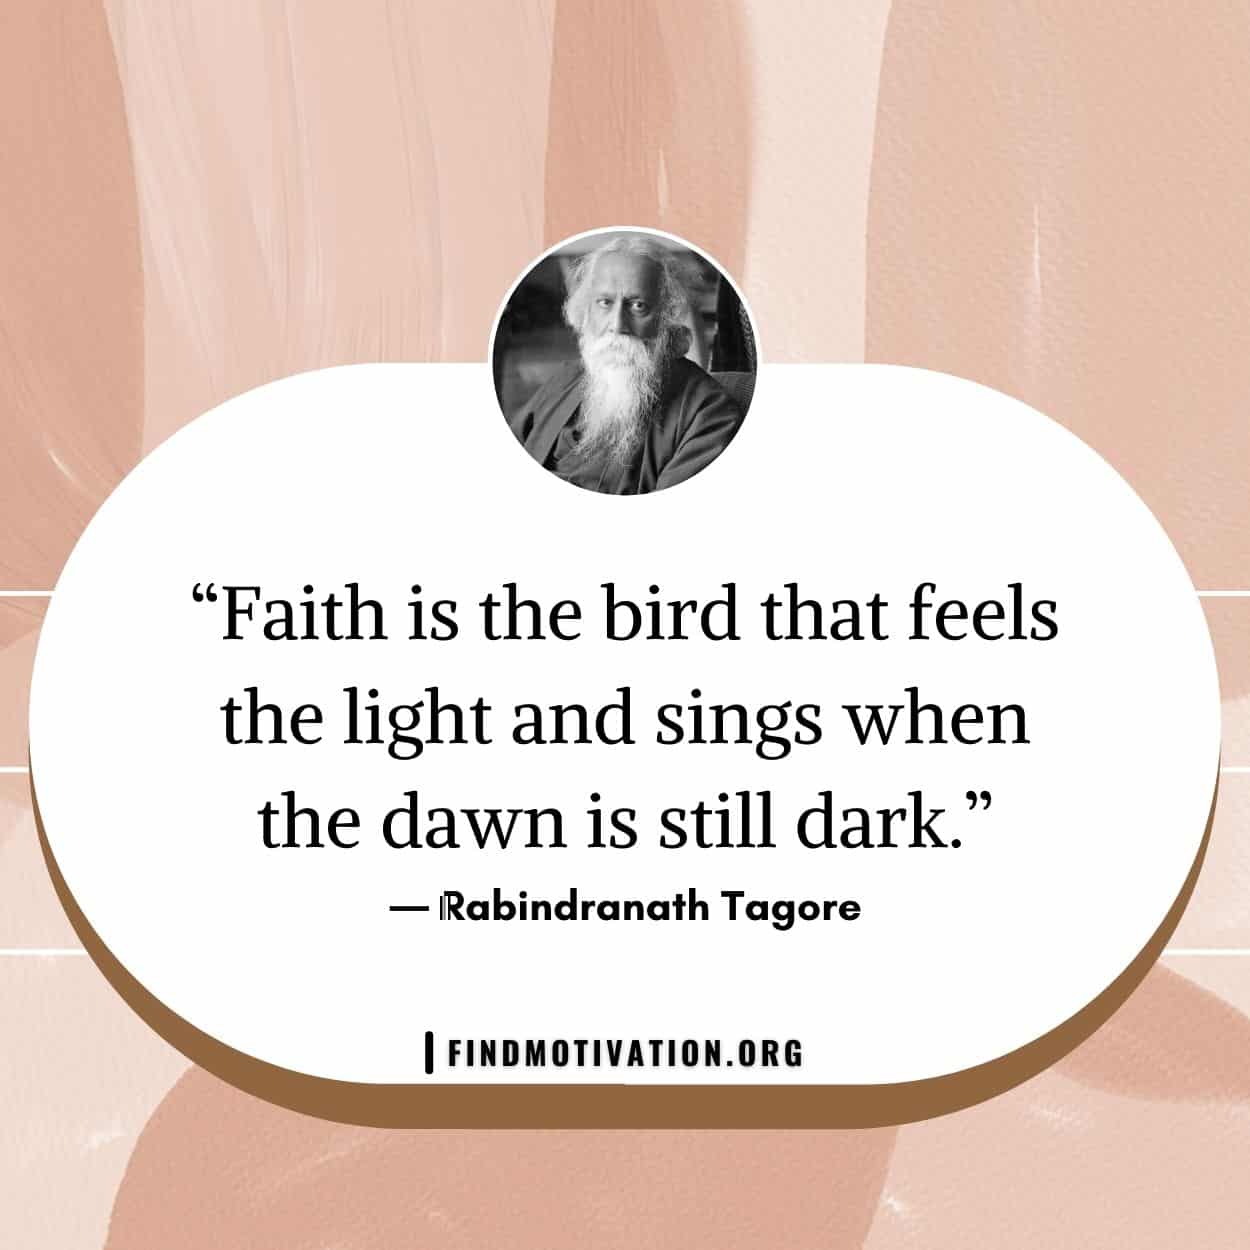 Rabindranath Tagore Motivational Quotes to inspire you